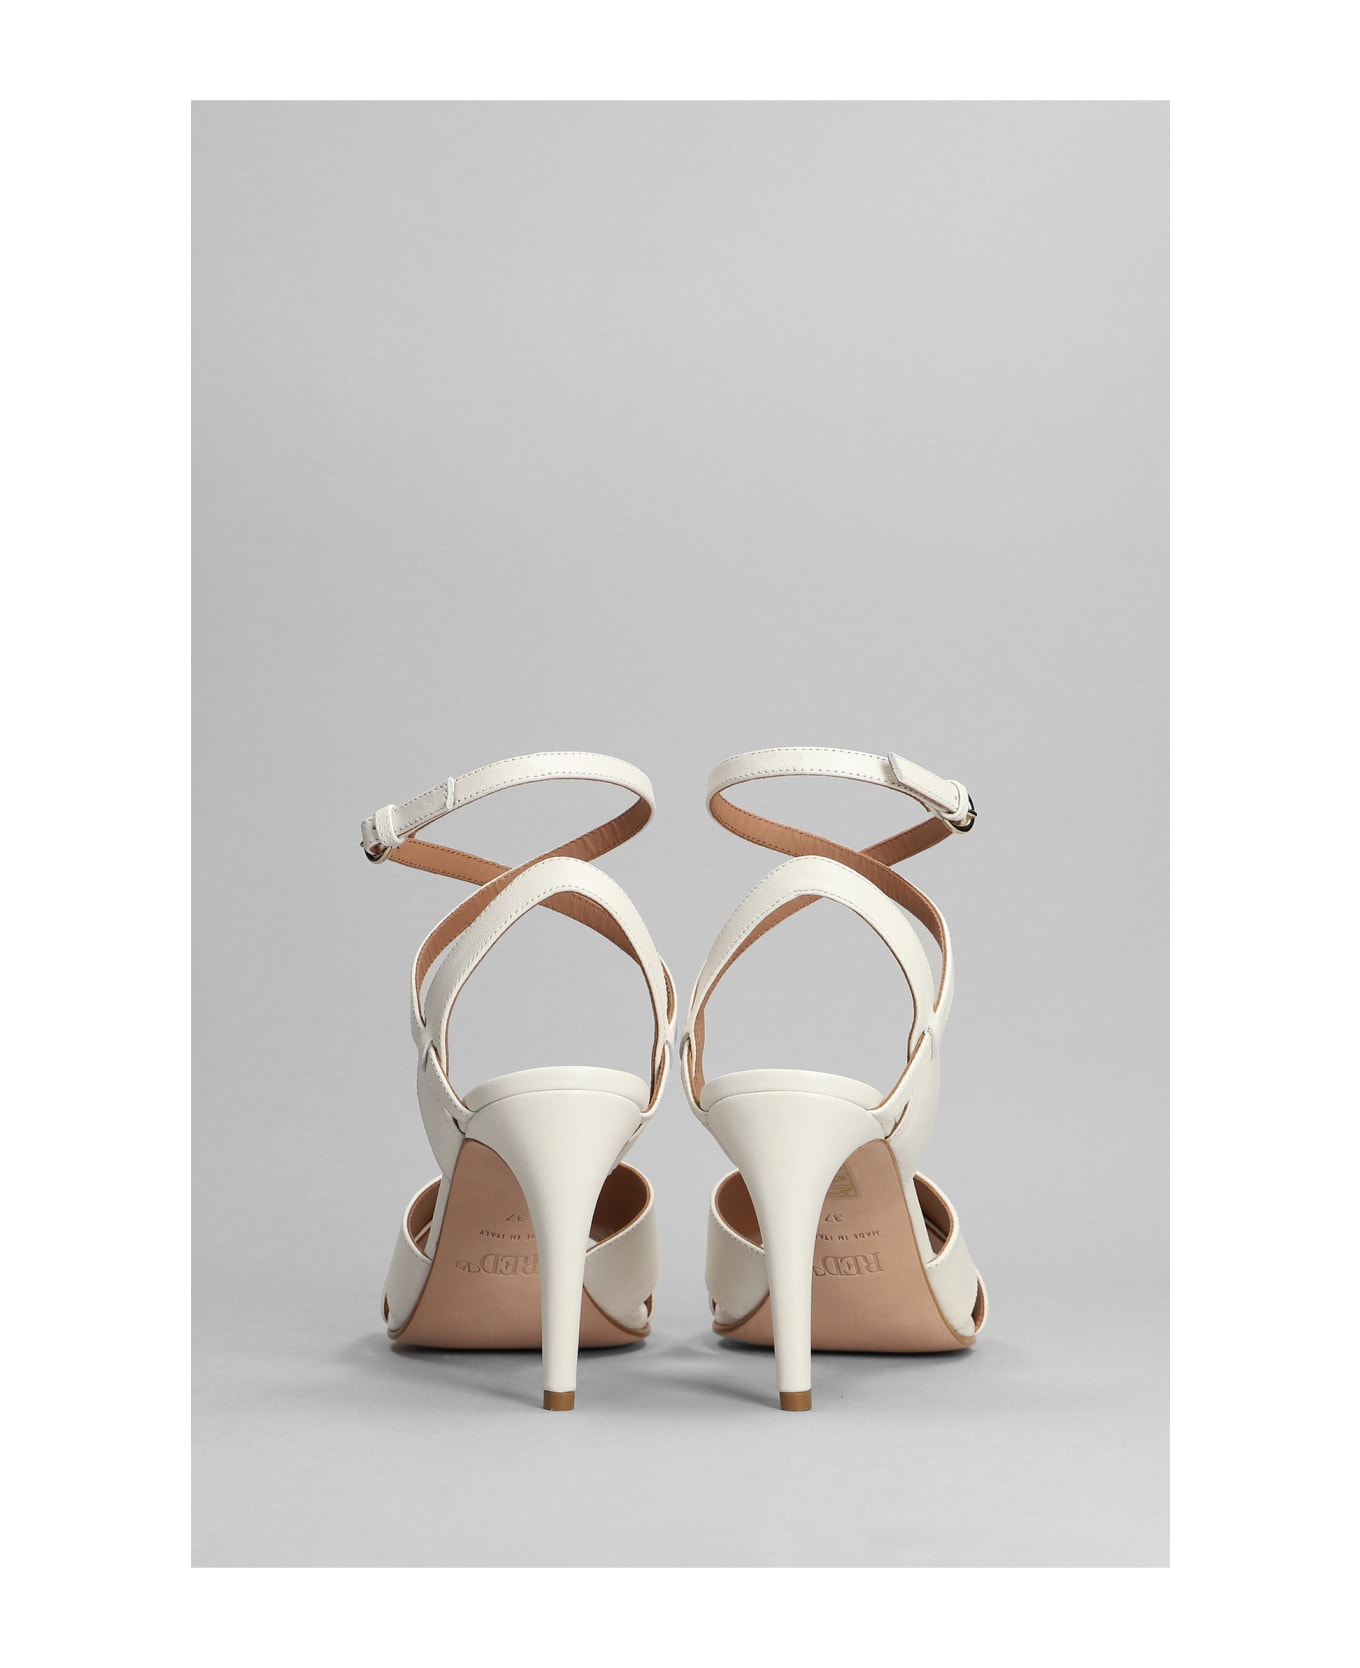 RED Valentino Sandals In White Leather - white サンダル